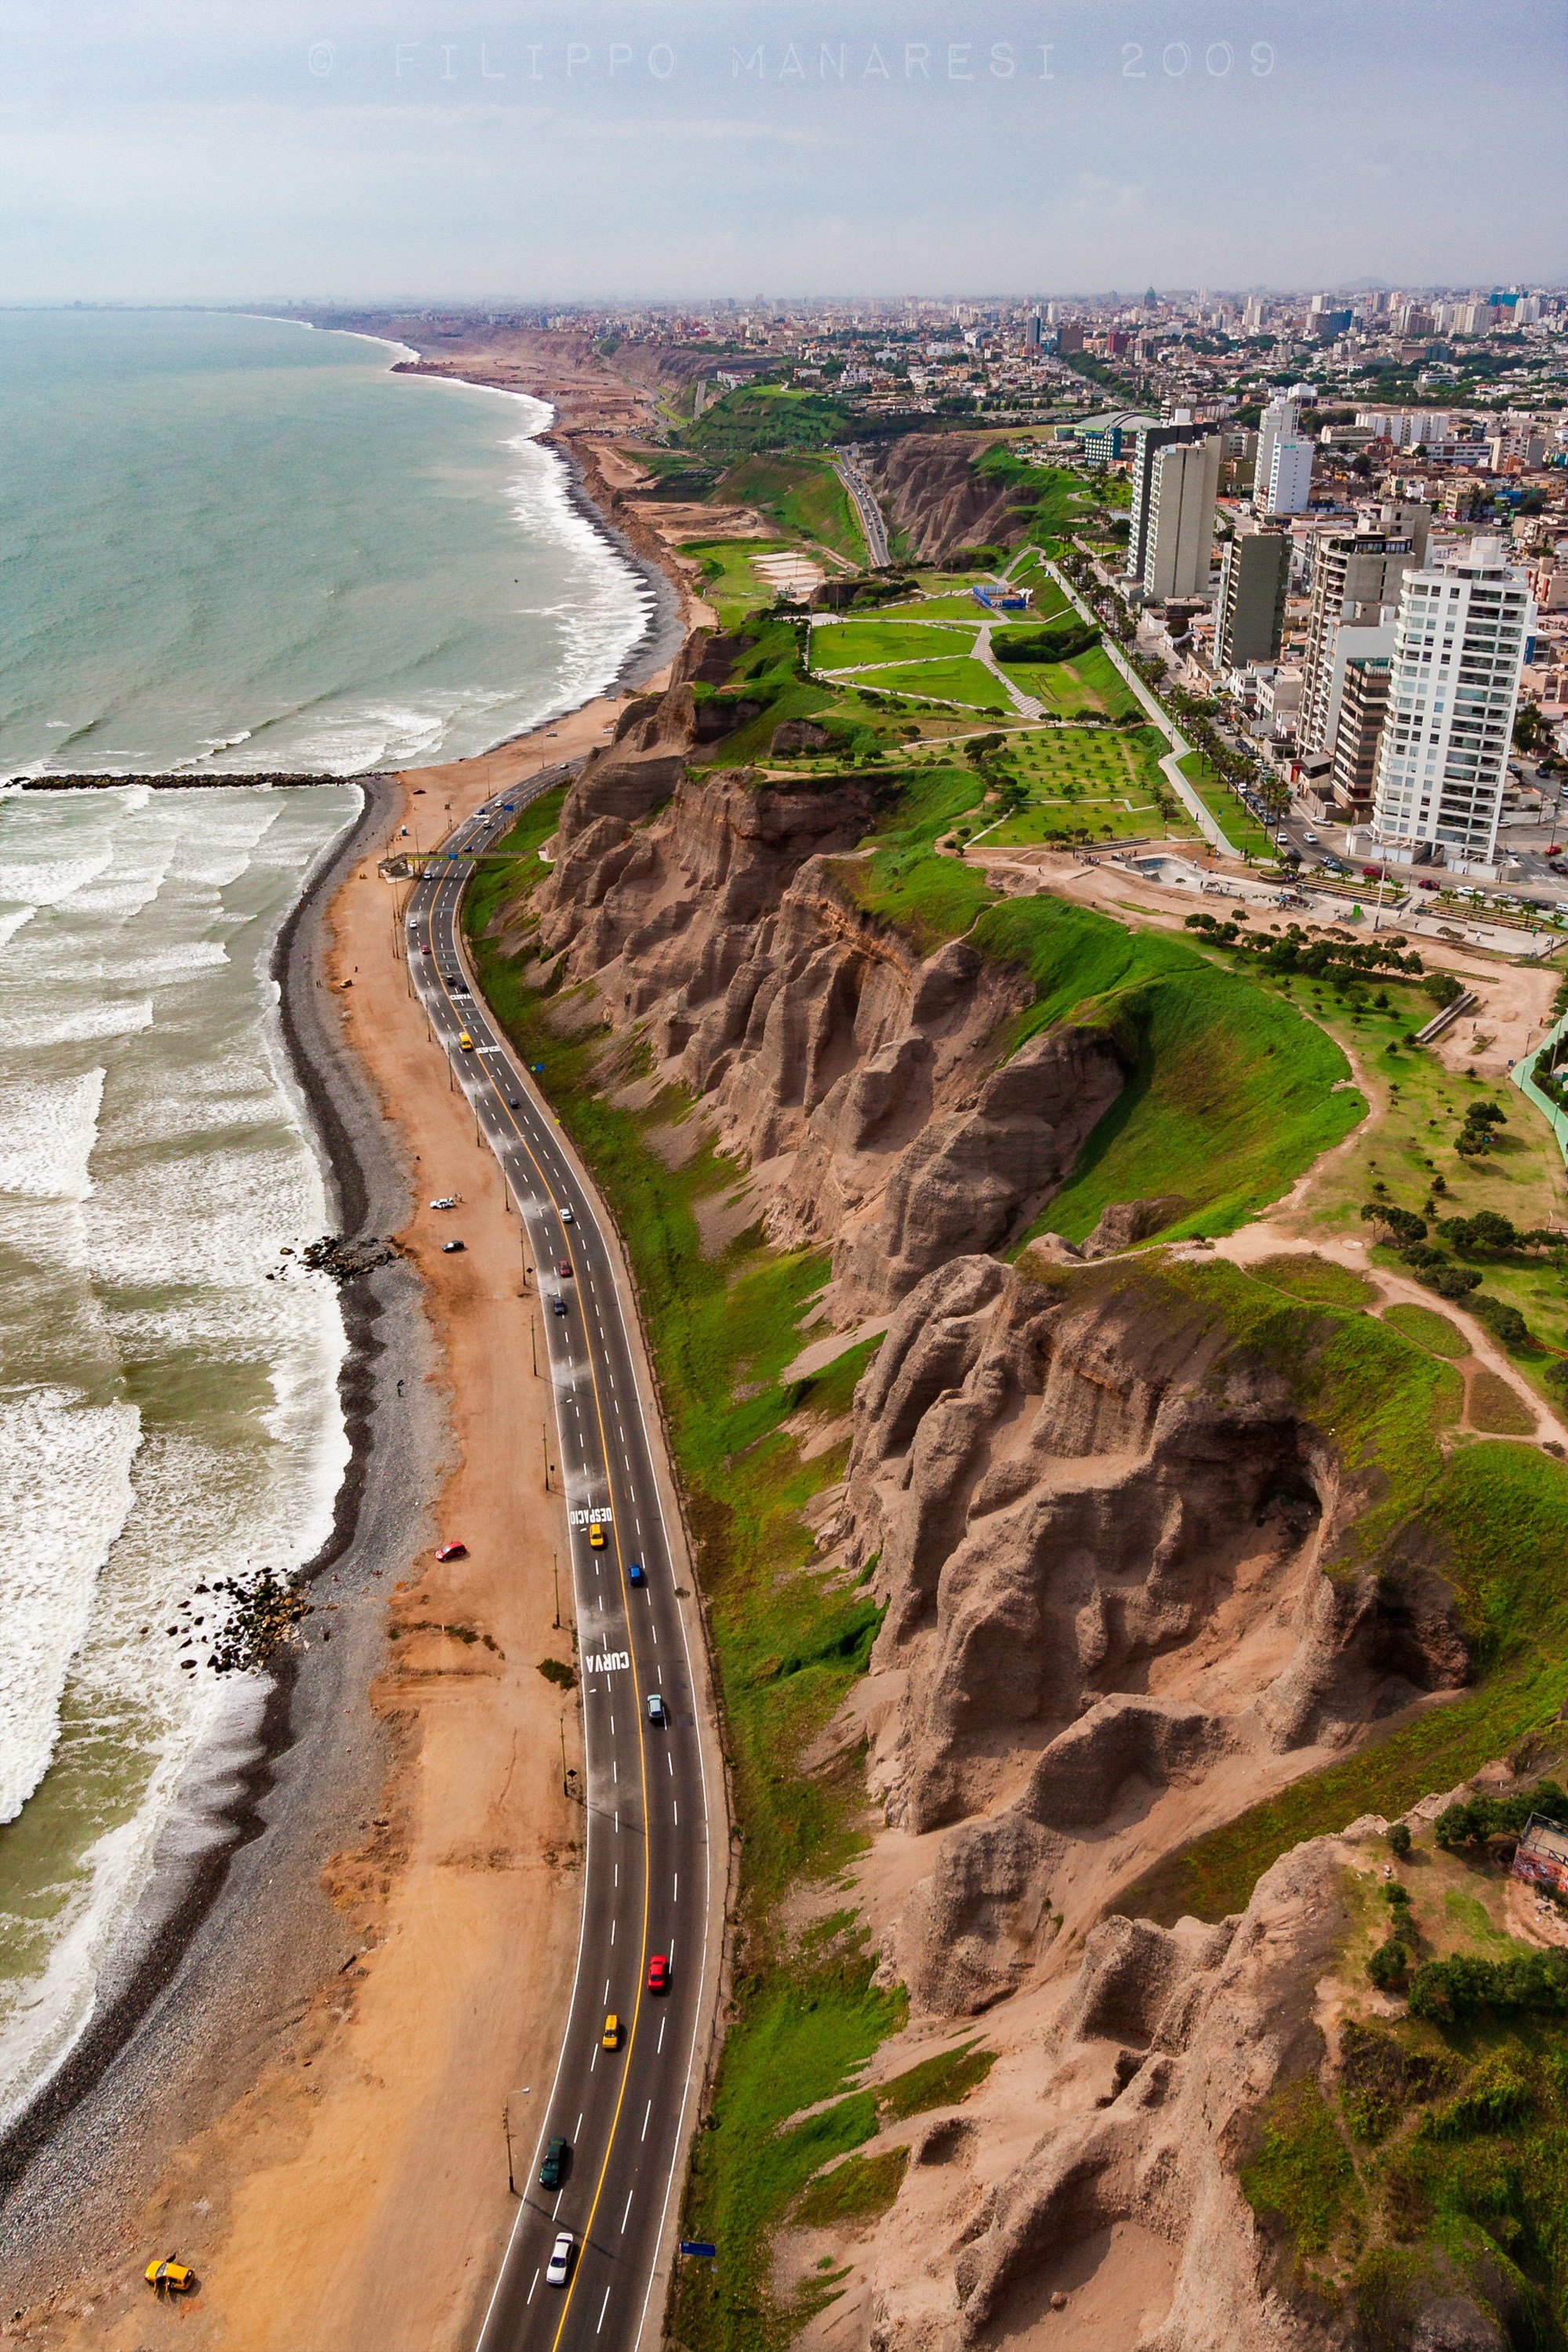 Flying over Lima, background and more